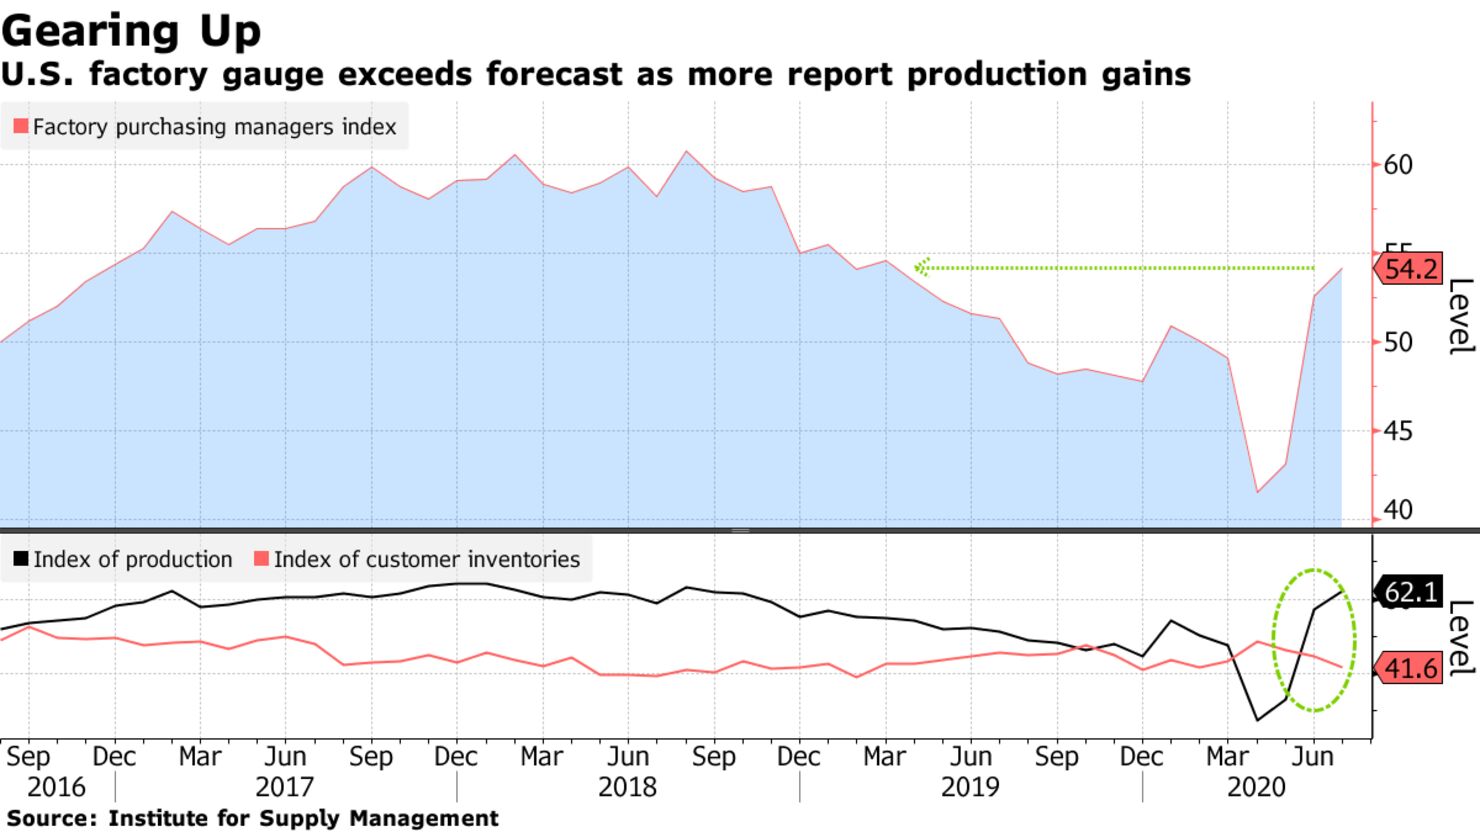 U.S. factory gauge exceeds forecast as more report production gains